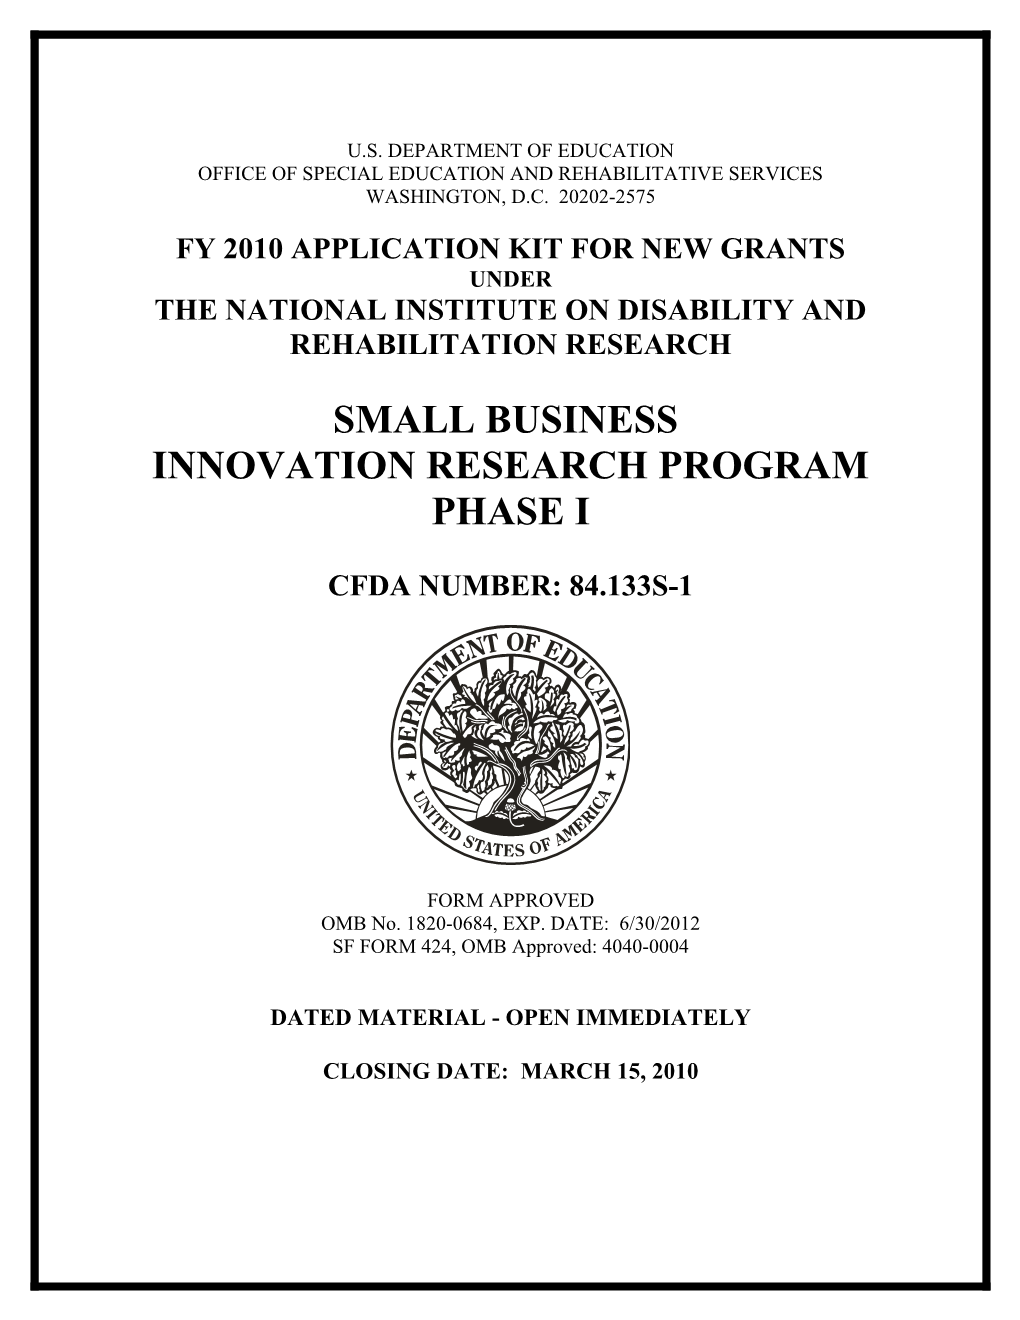 FY 2010 Application for the Small Business Innovative Research Program; CFDA: 84.133S-1